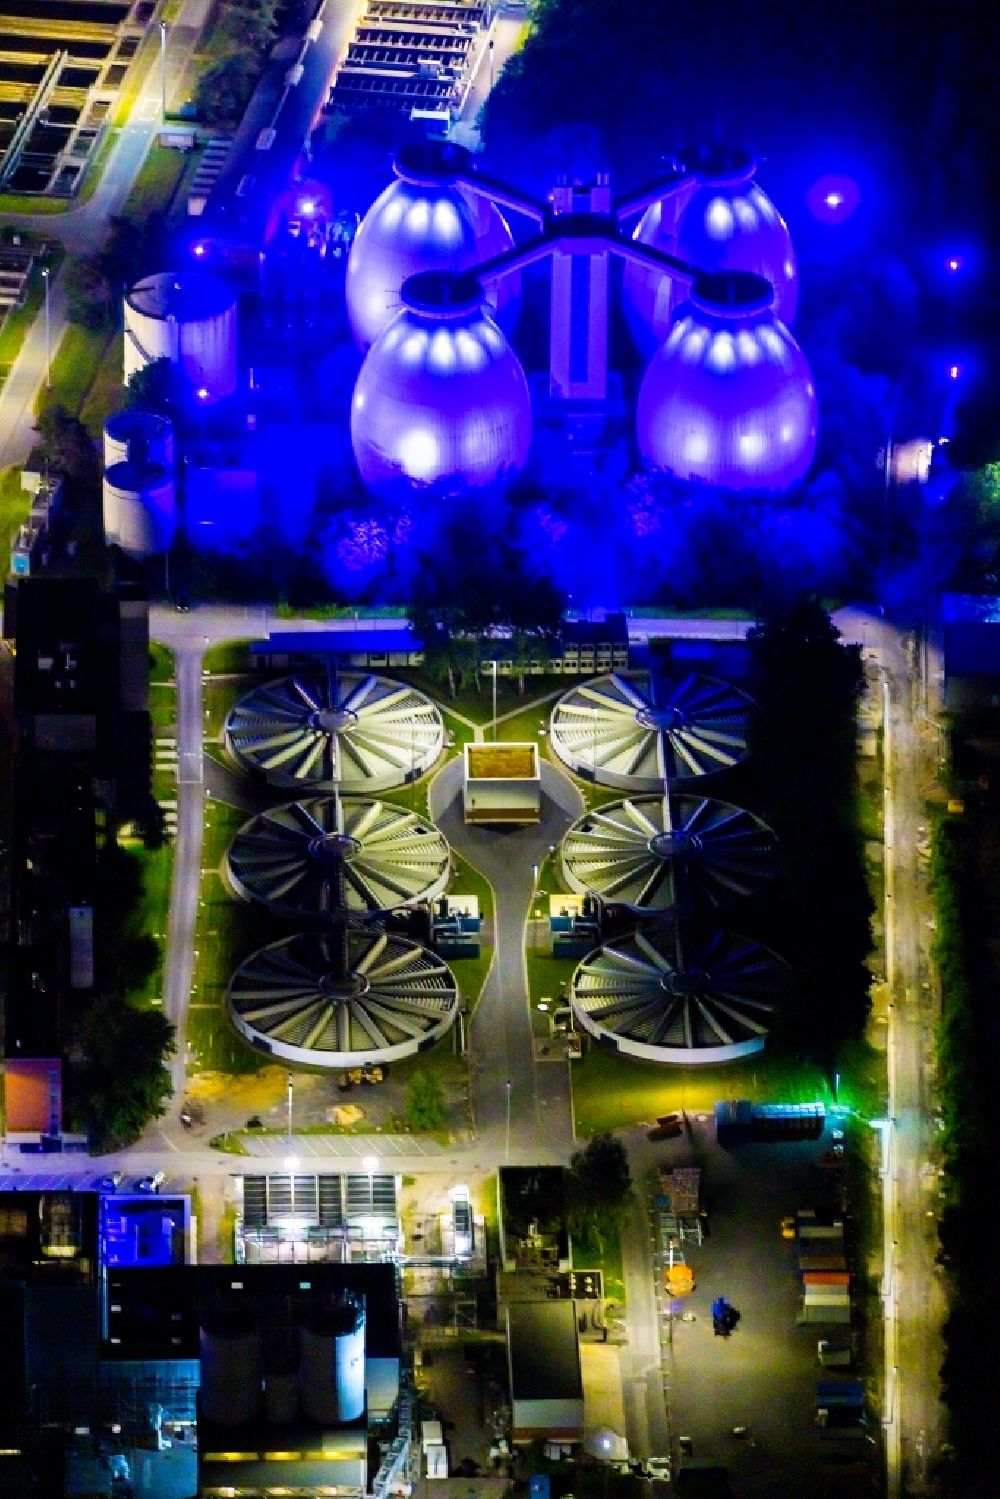 Bottrop at night from above - Night lighting sewage works Basin and purification steps for waste water treatment in Bottrop at Ruhrgebiet in the state North Rhine-Westphalia, Germany